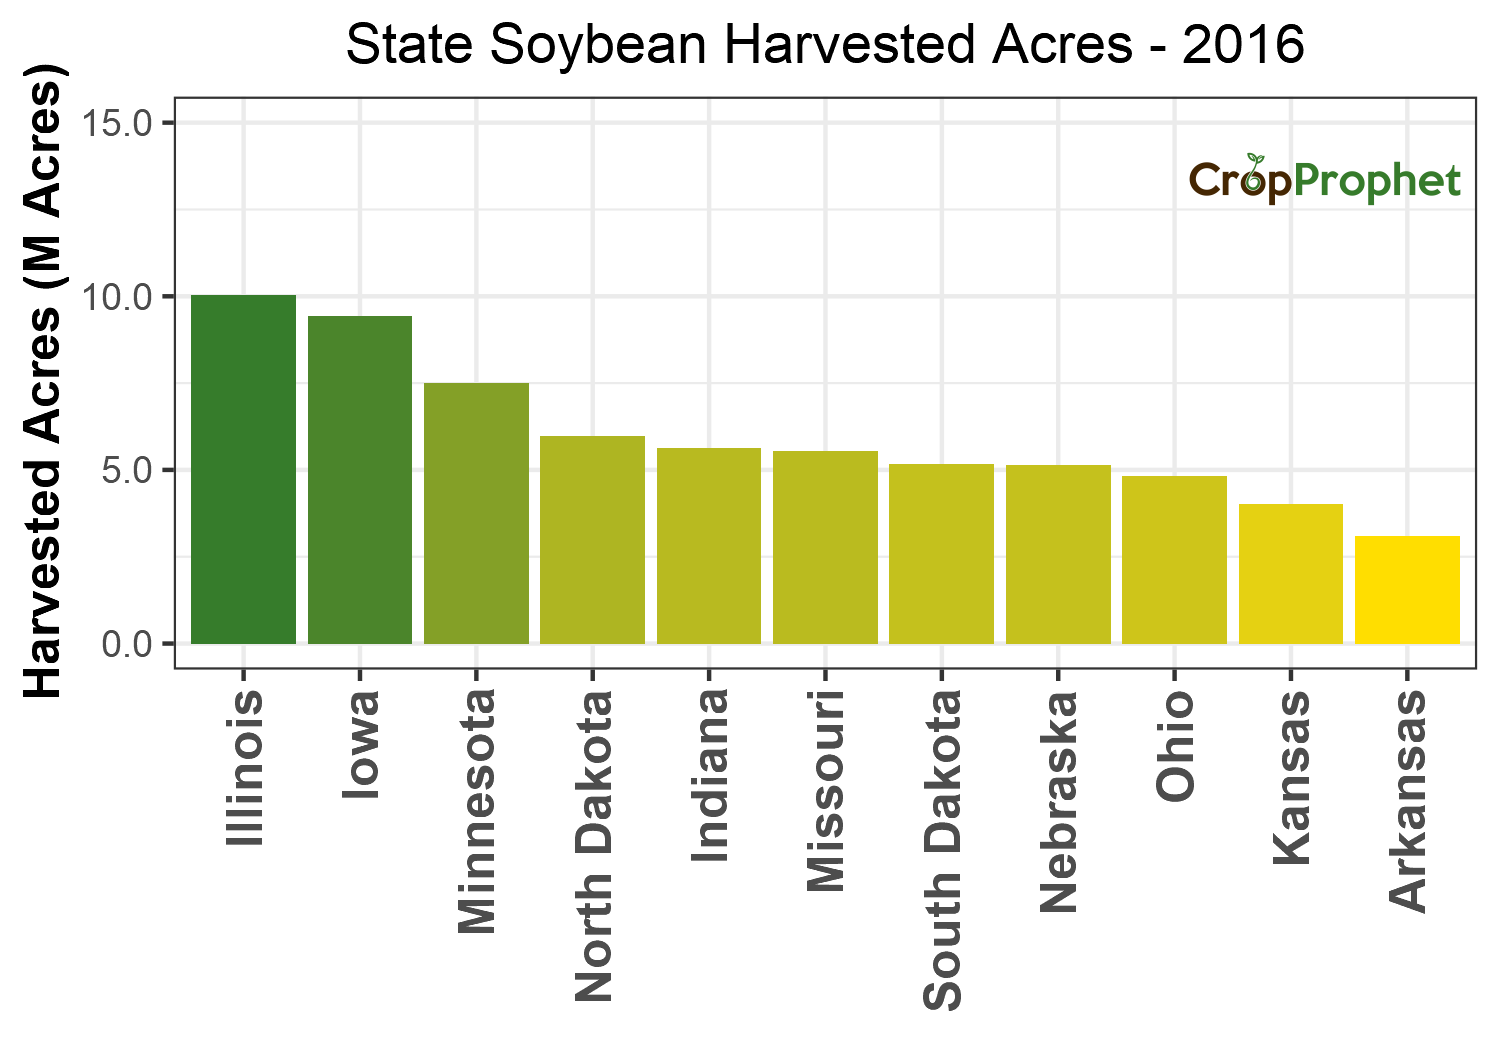 Soybean Harvested Acres by State - 2016 Rankings